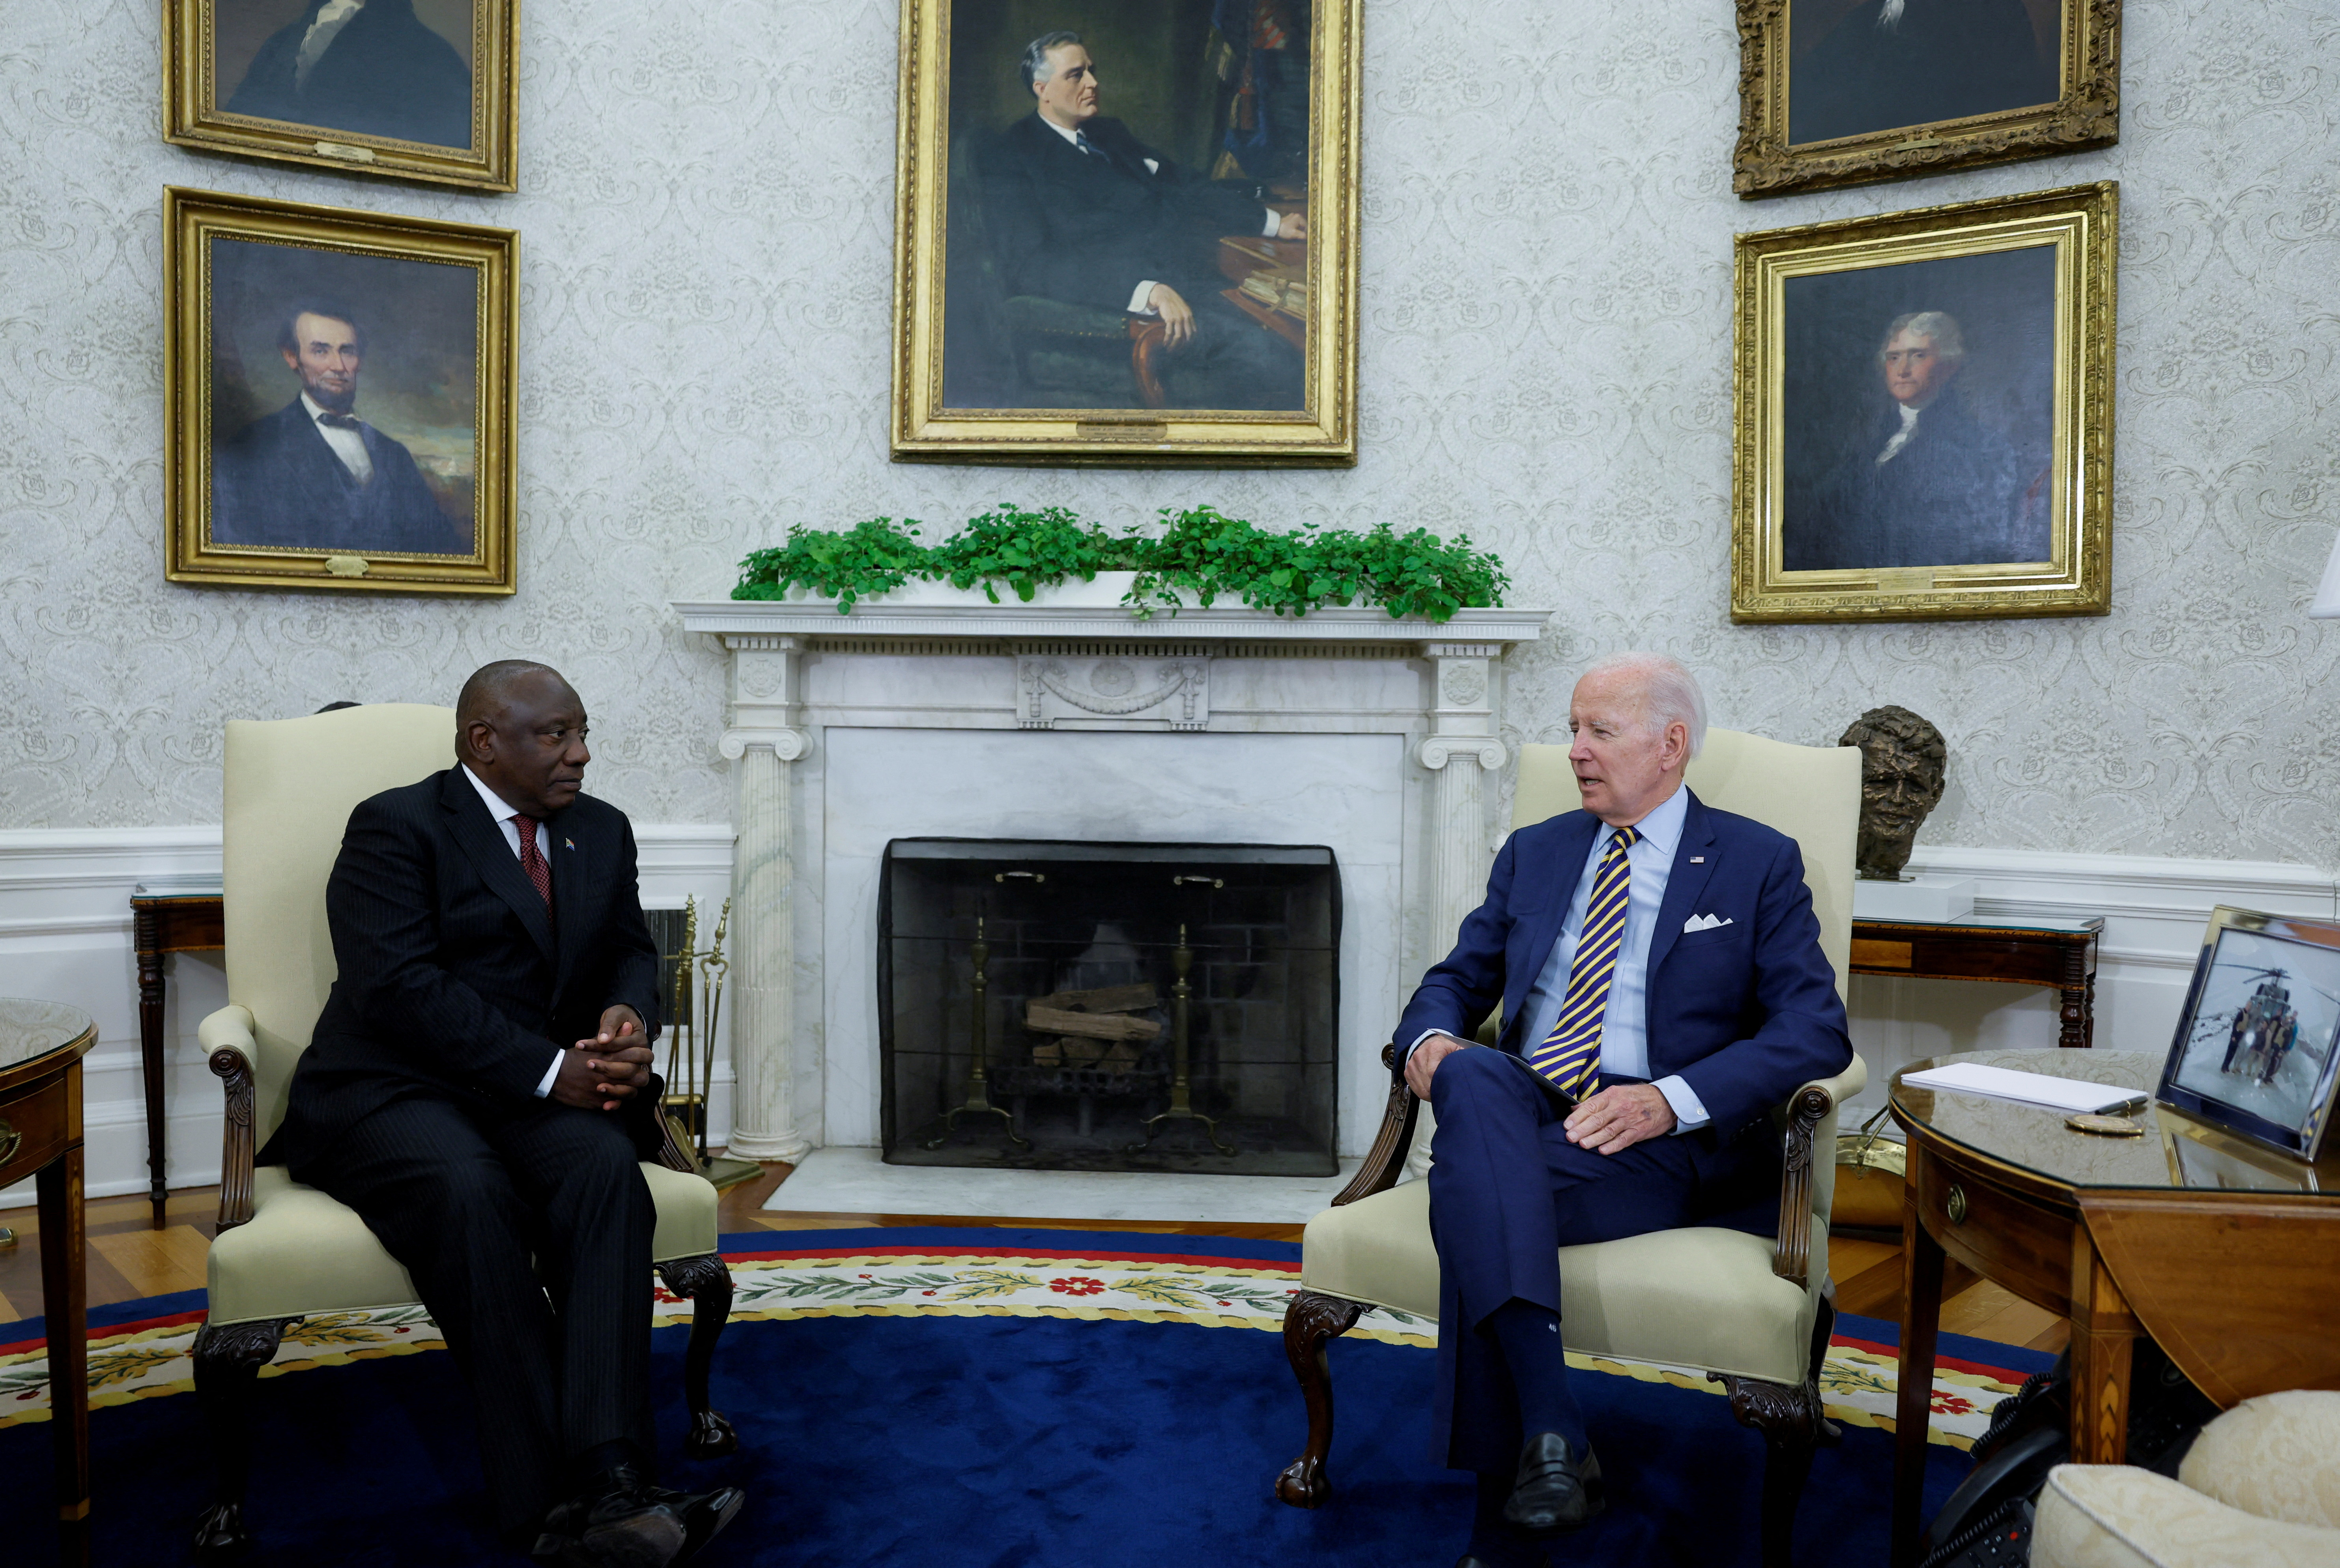 U.S. President Biden and South Africa's President Ramaphosa hold talks at the White House in Washington